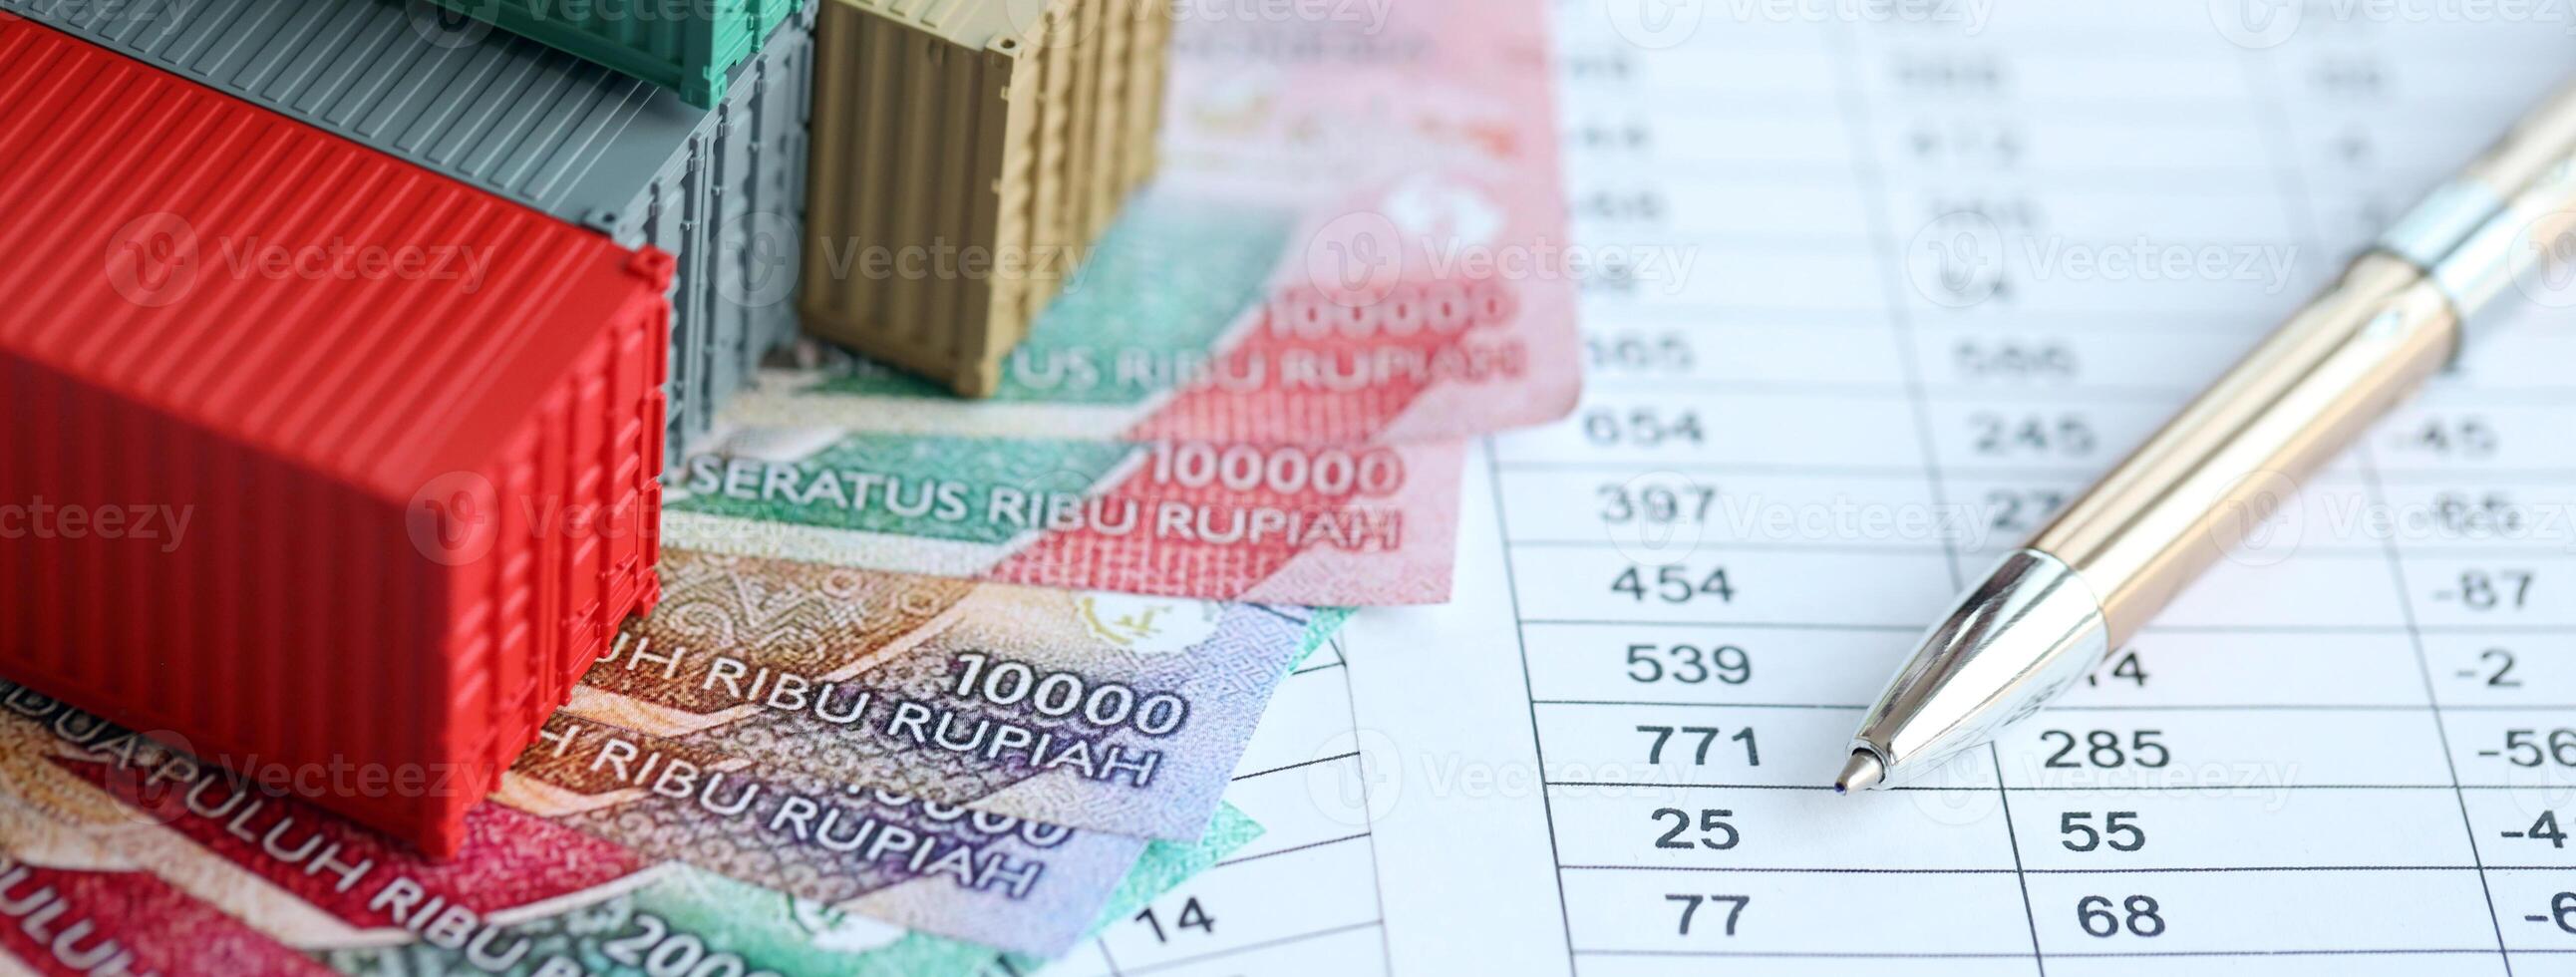 Company shipping cargo containers in Indonesia with rupiah money bills and pen photo